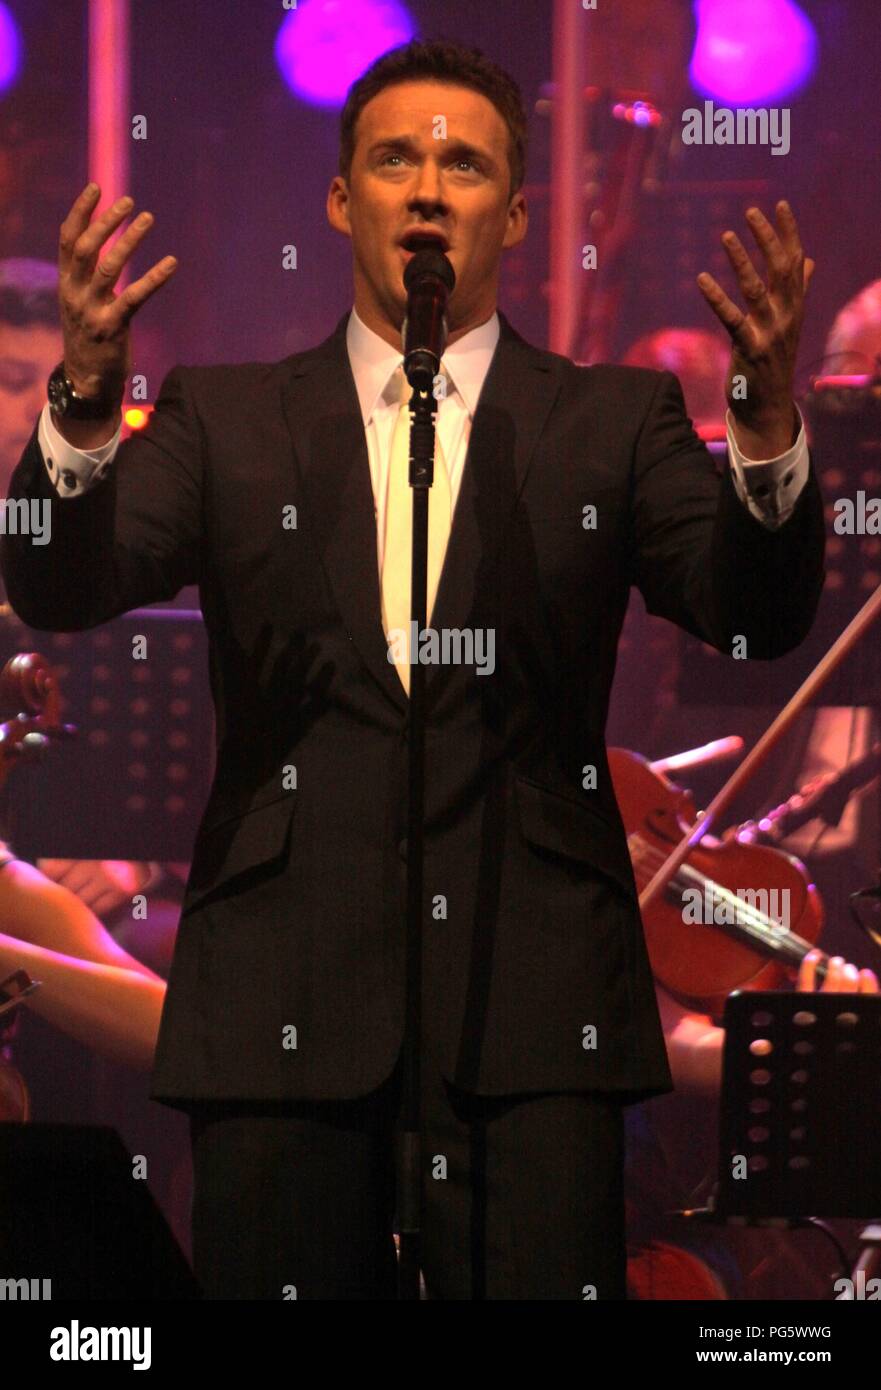 Liverpool,UK Opera star Russell Watson performs at Liverpool Philharmonic Hall to  a sell out crowd credit Ian Fairbrother/Alamy stock photos Stock Photo